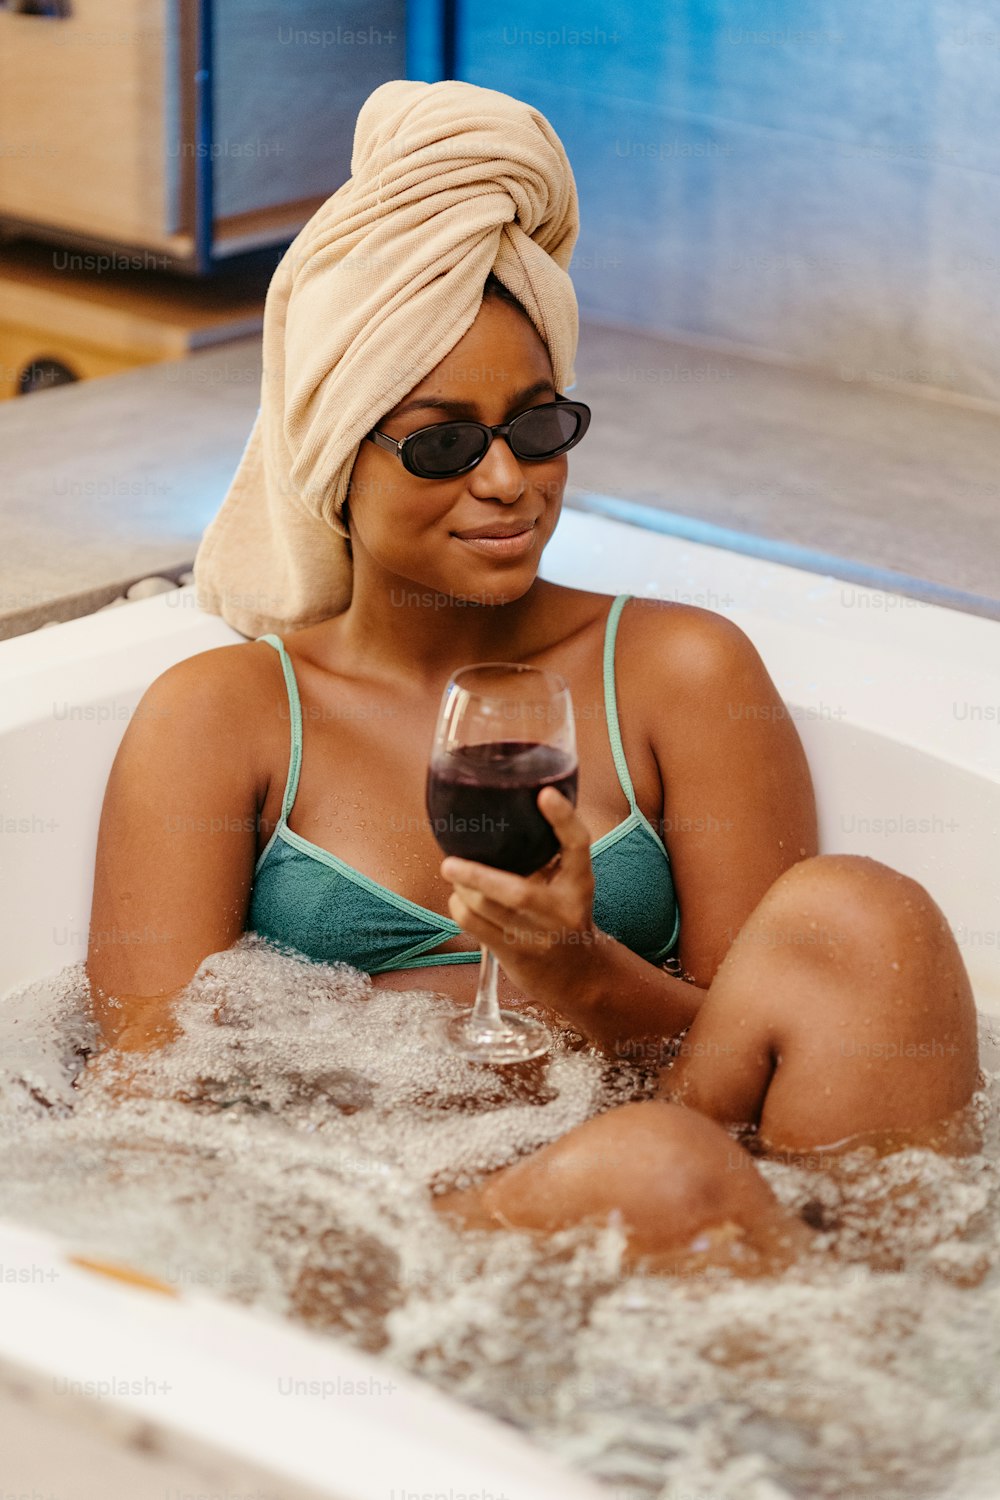 a woman in a bathtub holding a glass of wine